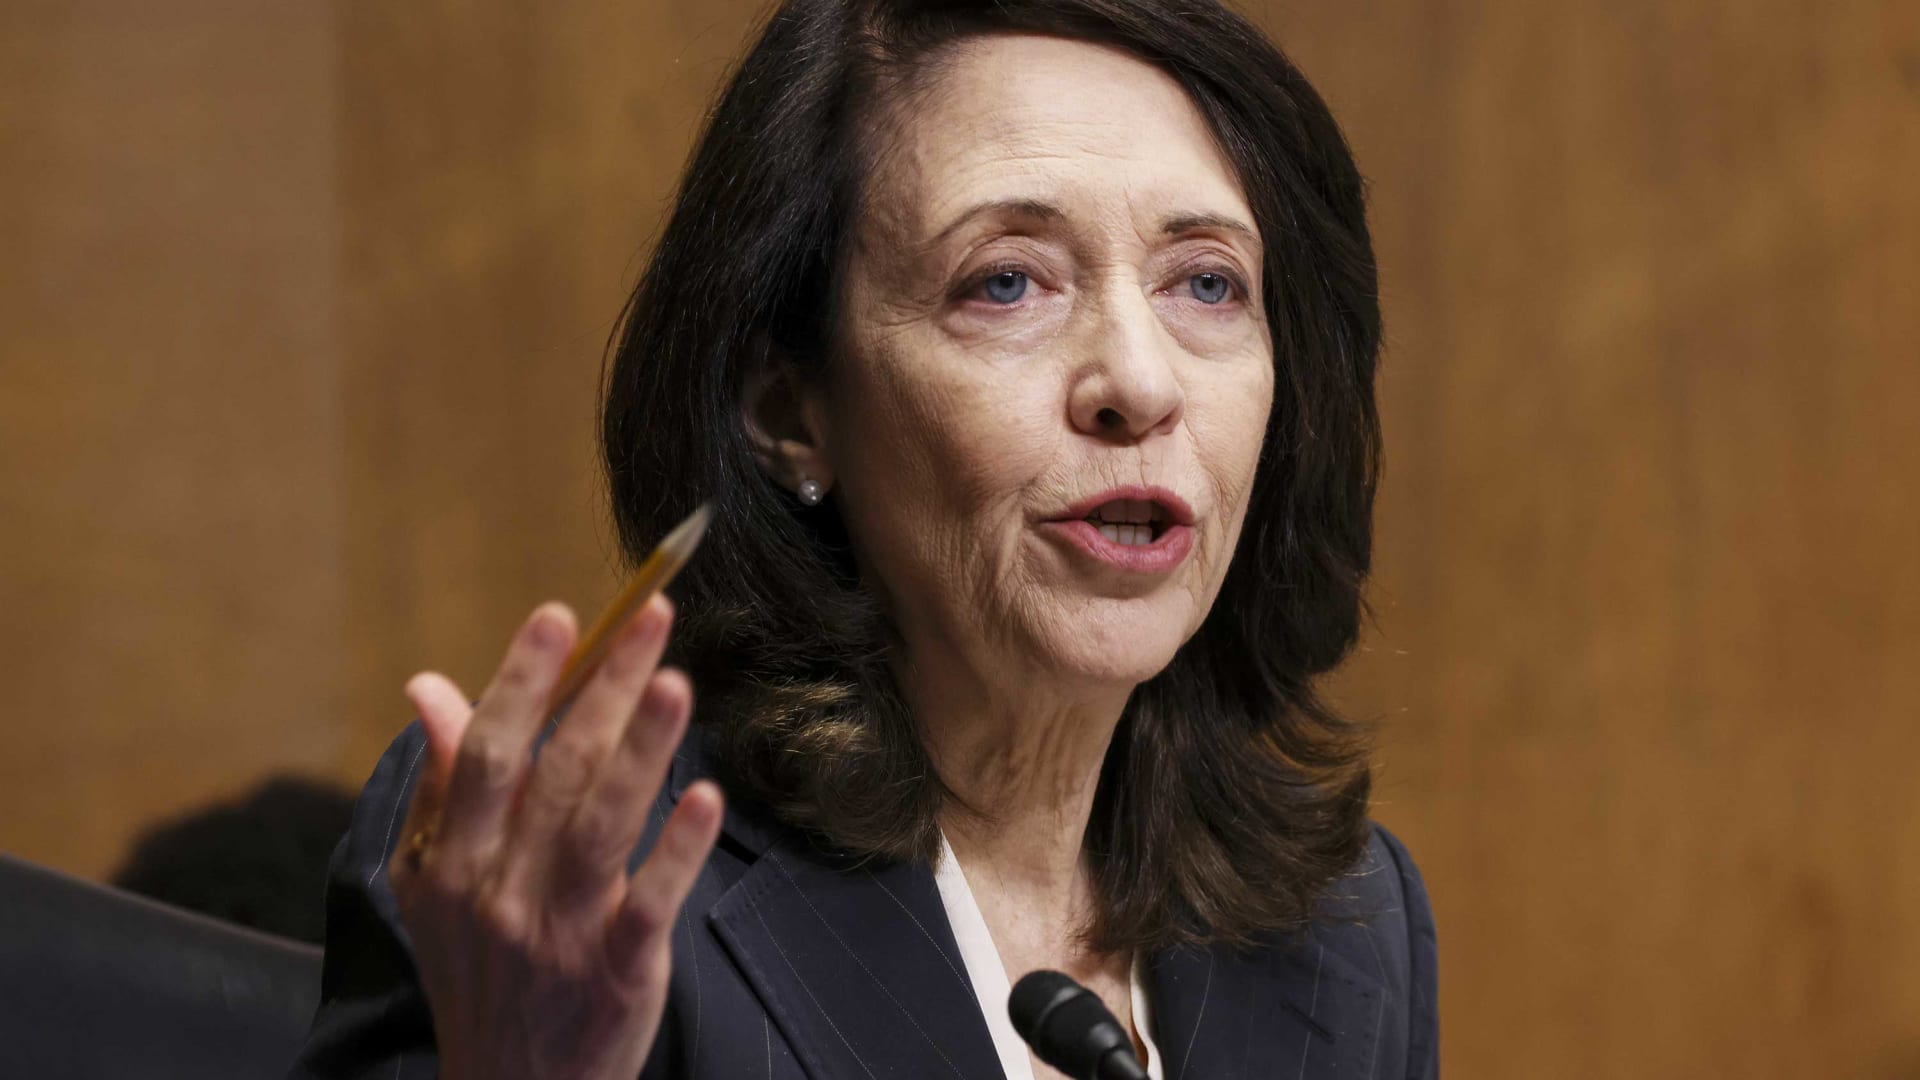 Senator Maria Cantwell, a Democrat from Washington, speaks during a Senate Finance Committee hearing in Washington, D.C., on Tuesday, June 8, 2021.